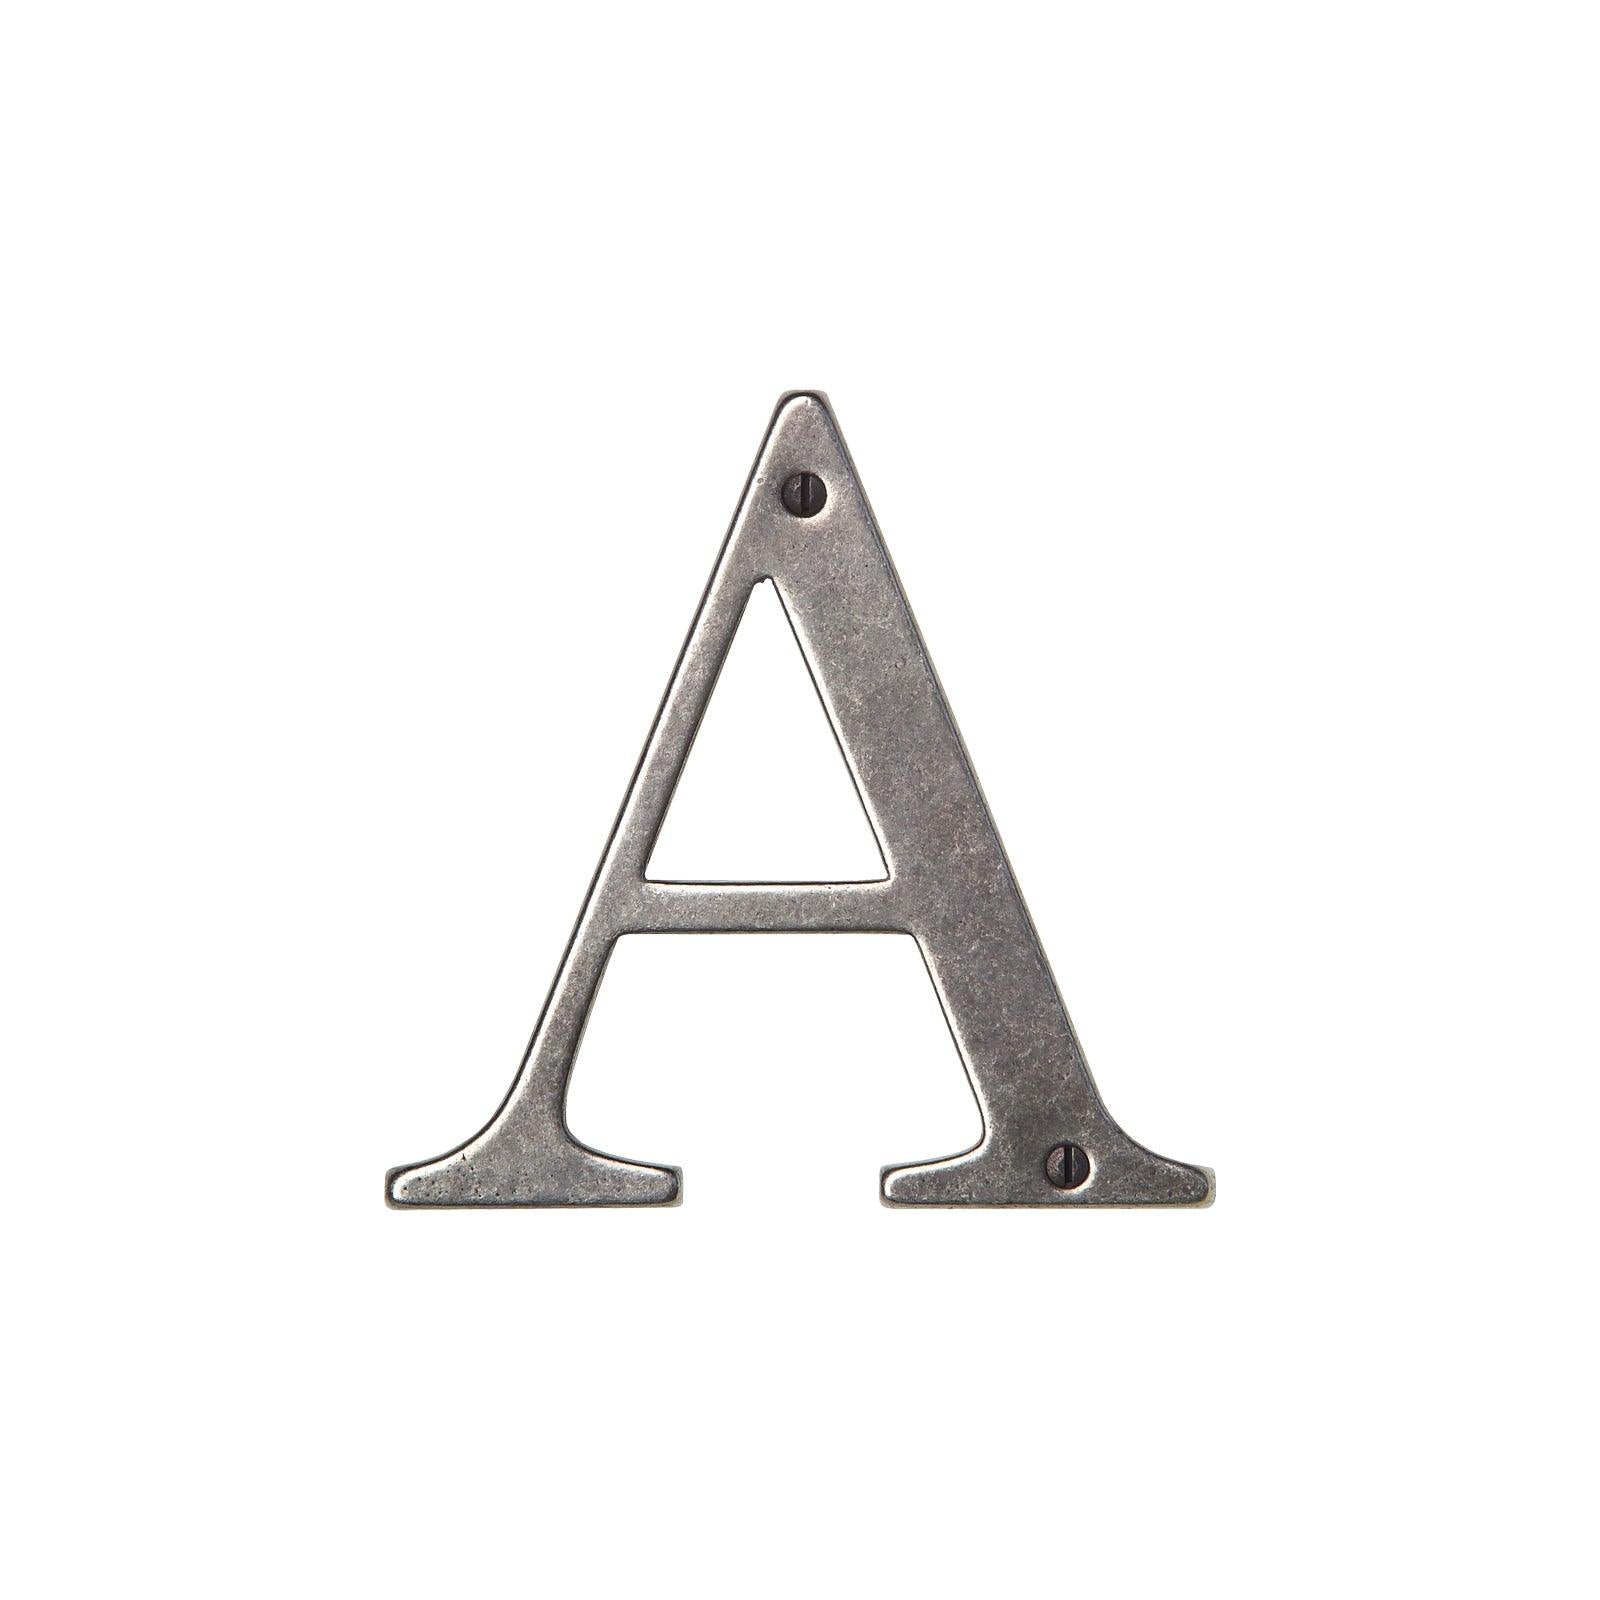 L400H - 4" House Letter “H" - Discount Rocky Mountain Hardware